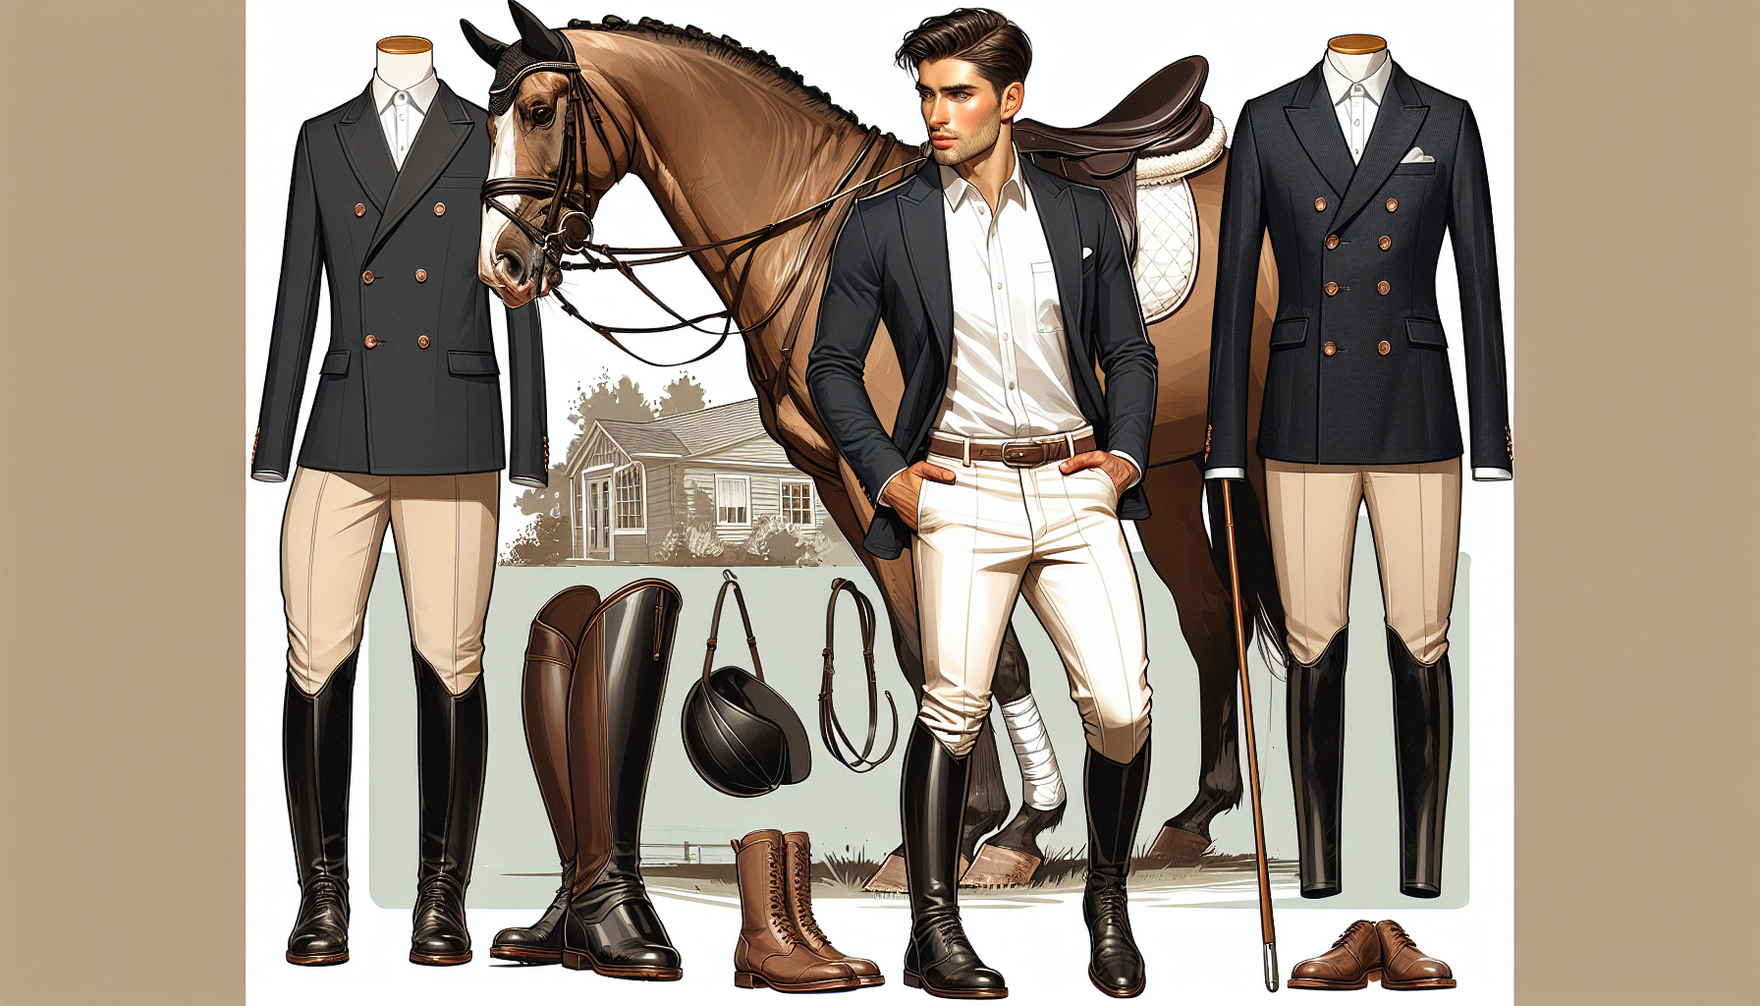 Let's envision a comprehensive equestrian look, a perfect blend of fashion and functionality. Imagine a male Hispanic rider, his outfit composed of a smart riding blazer, crisp white shirt, and beige 